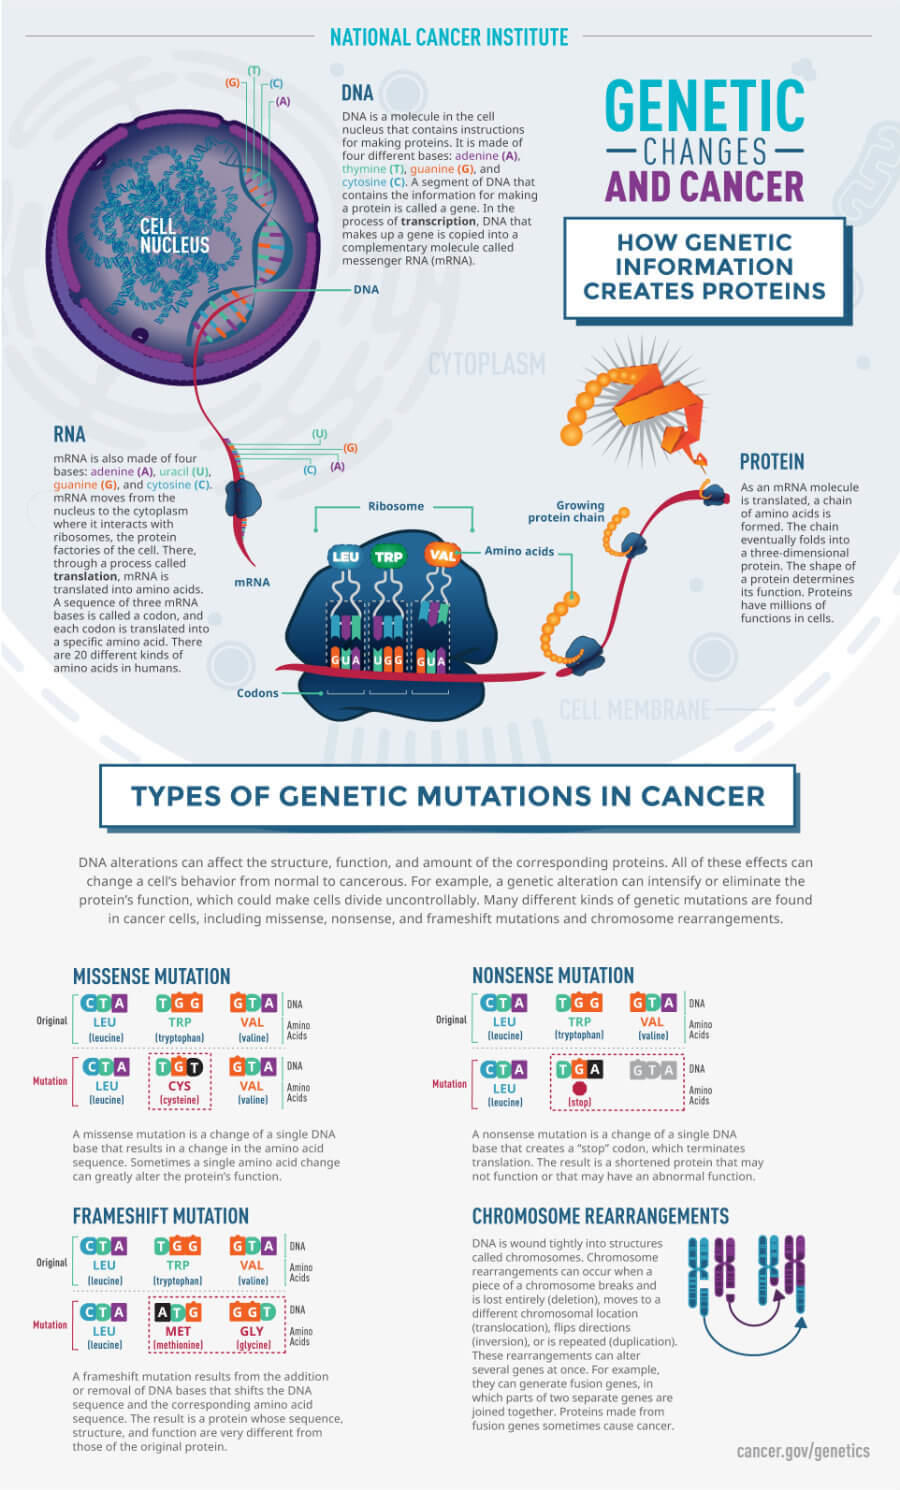 The Genetics of Cancer - National Cancer Institute